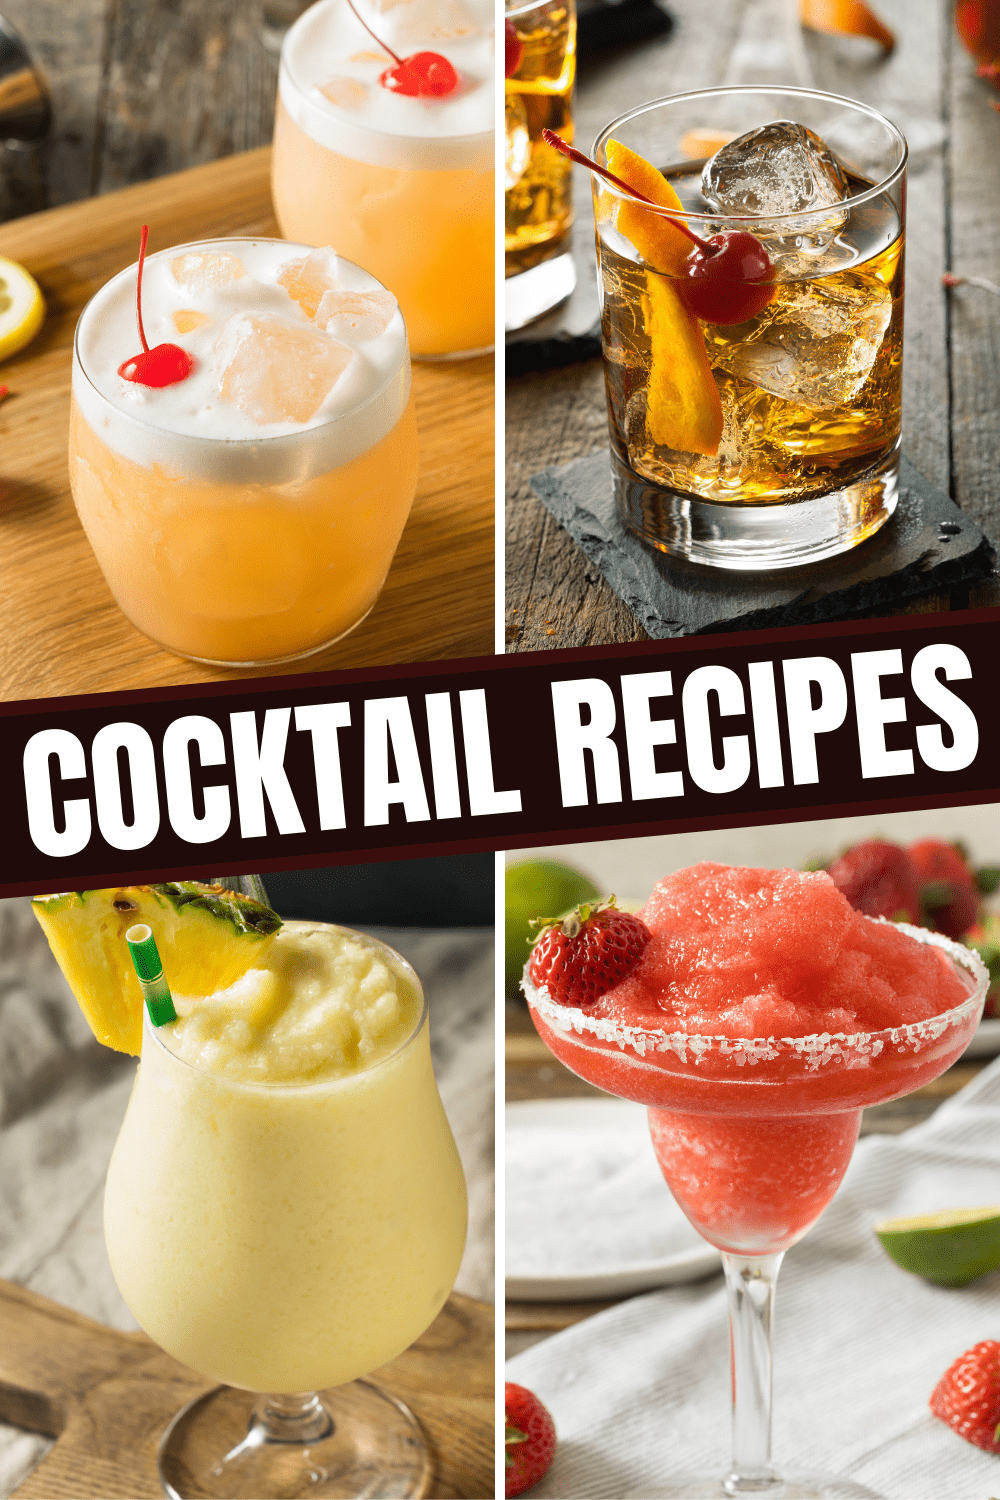 Cocktail Recipes 1 